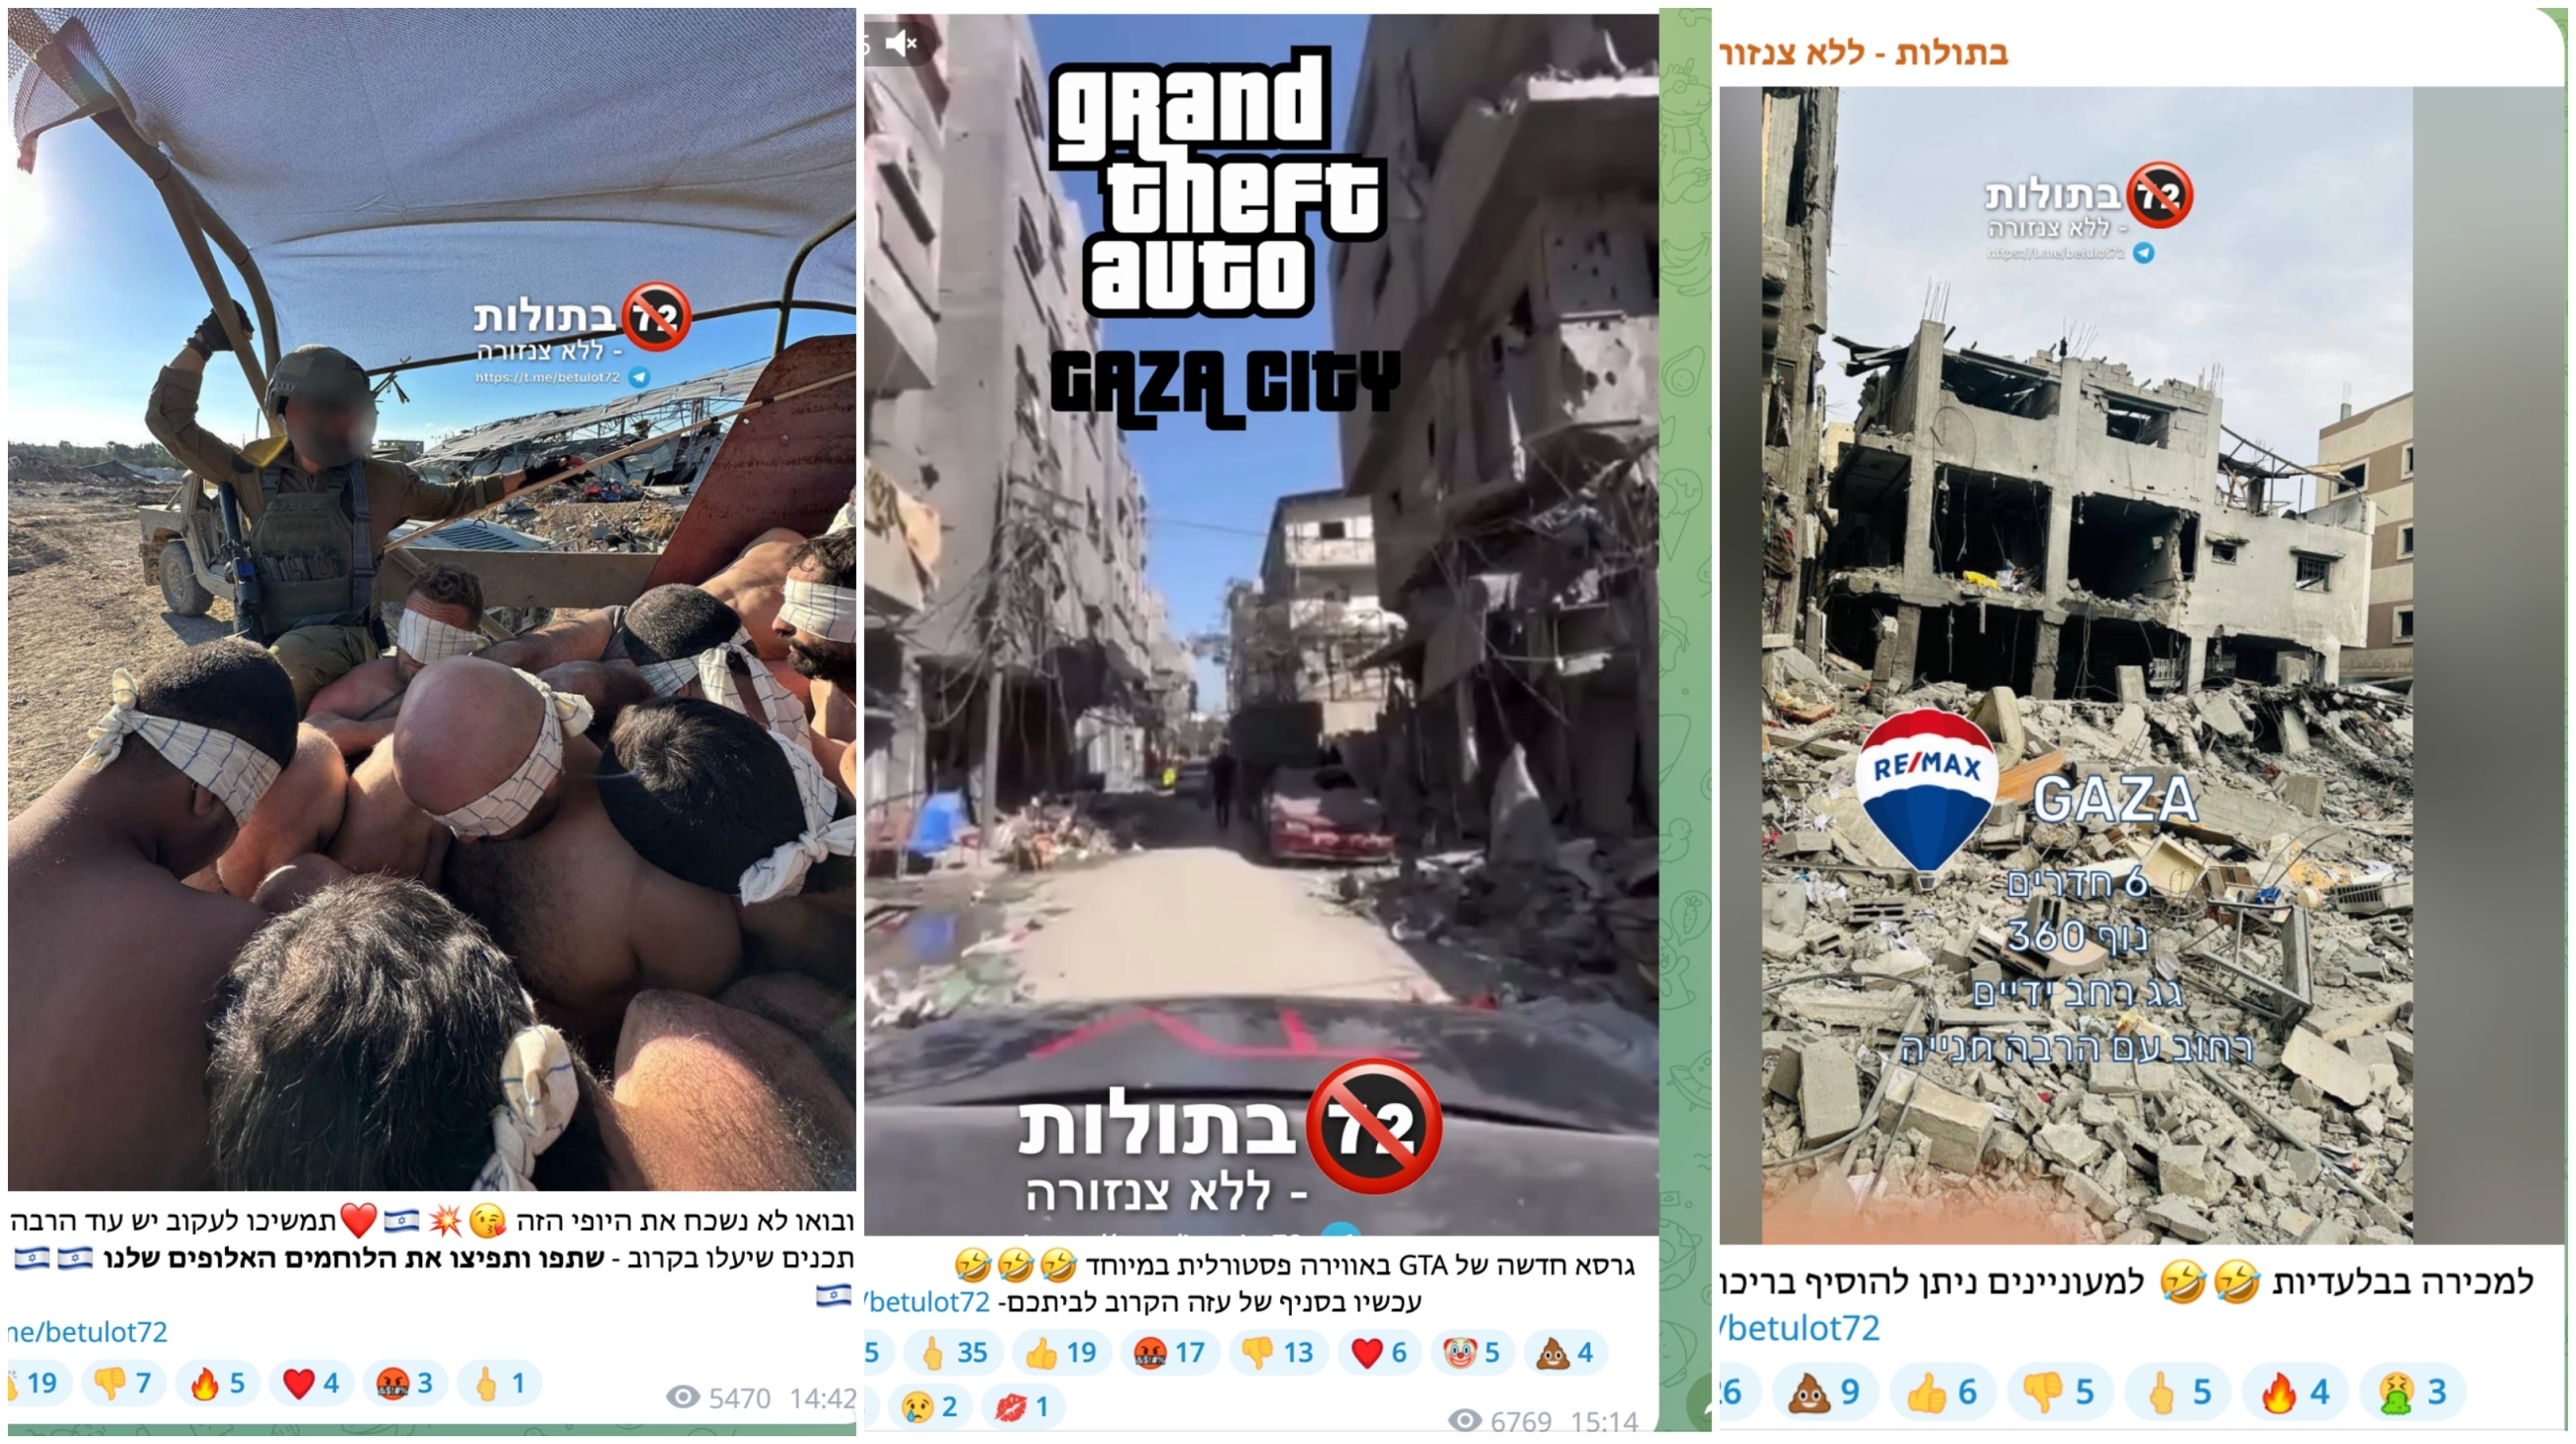 Screenshots from an Israeli army run Telegram channel show inciteful language and images (MEE/Screengrab)